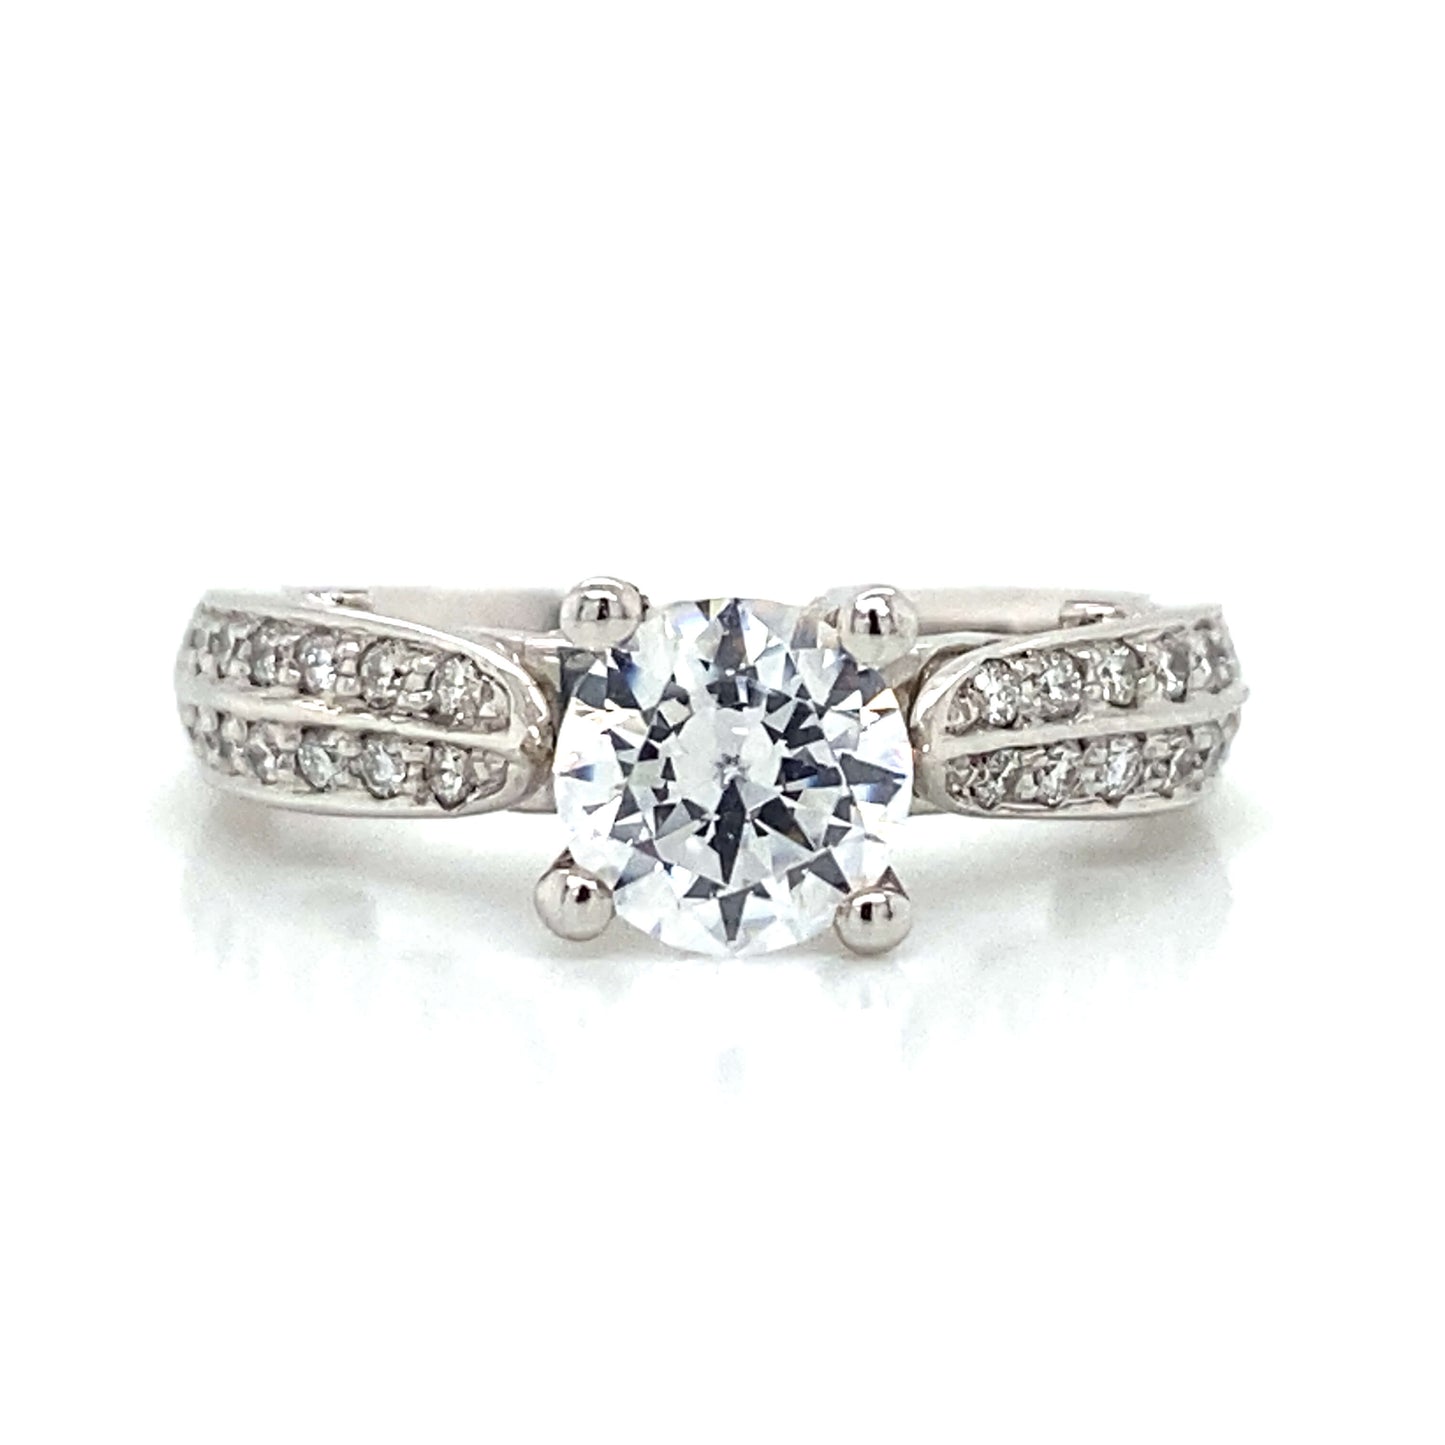 Verragio Pave Double Shank Engagement Ring in 18K White Gold